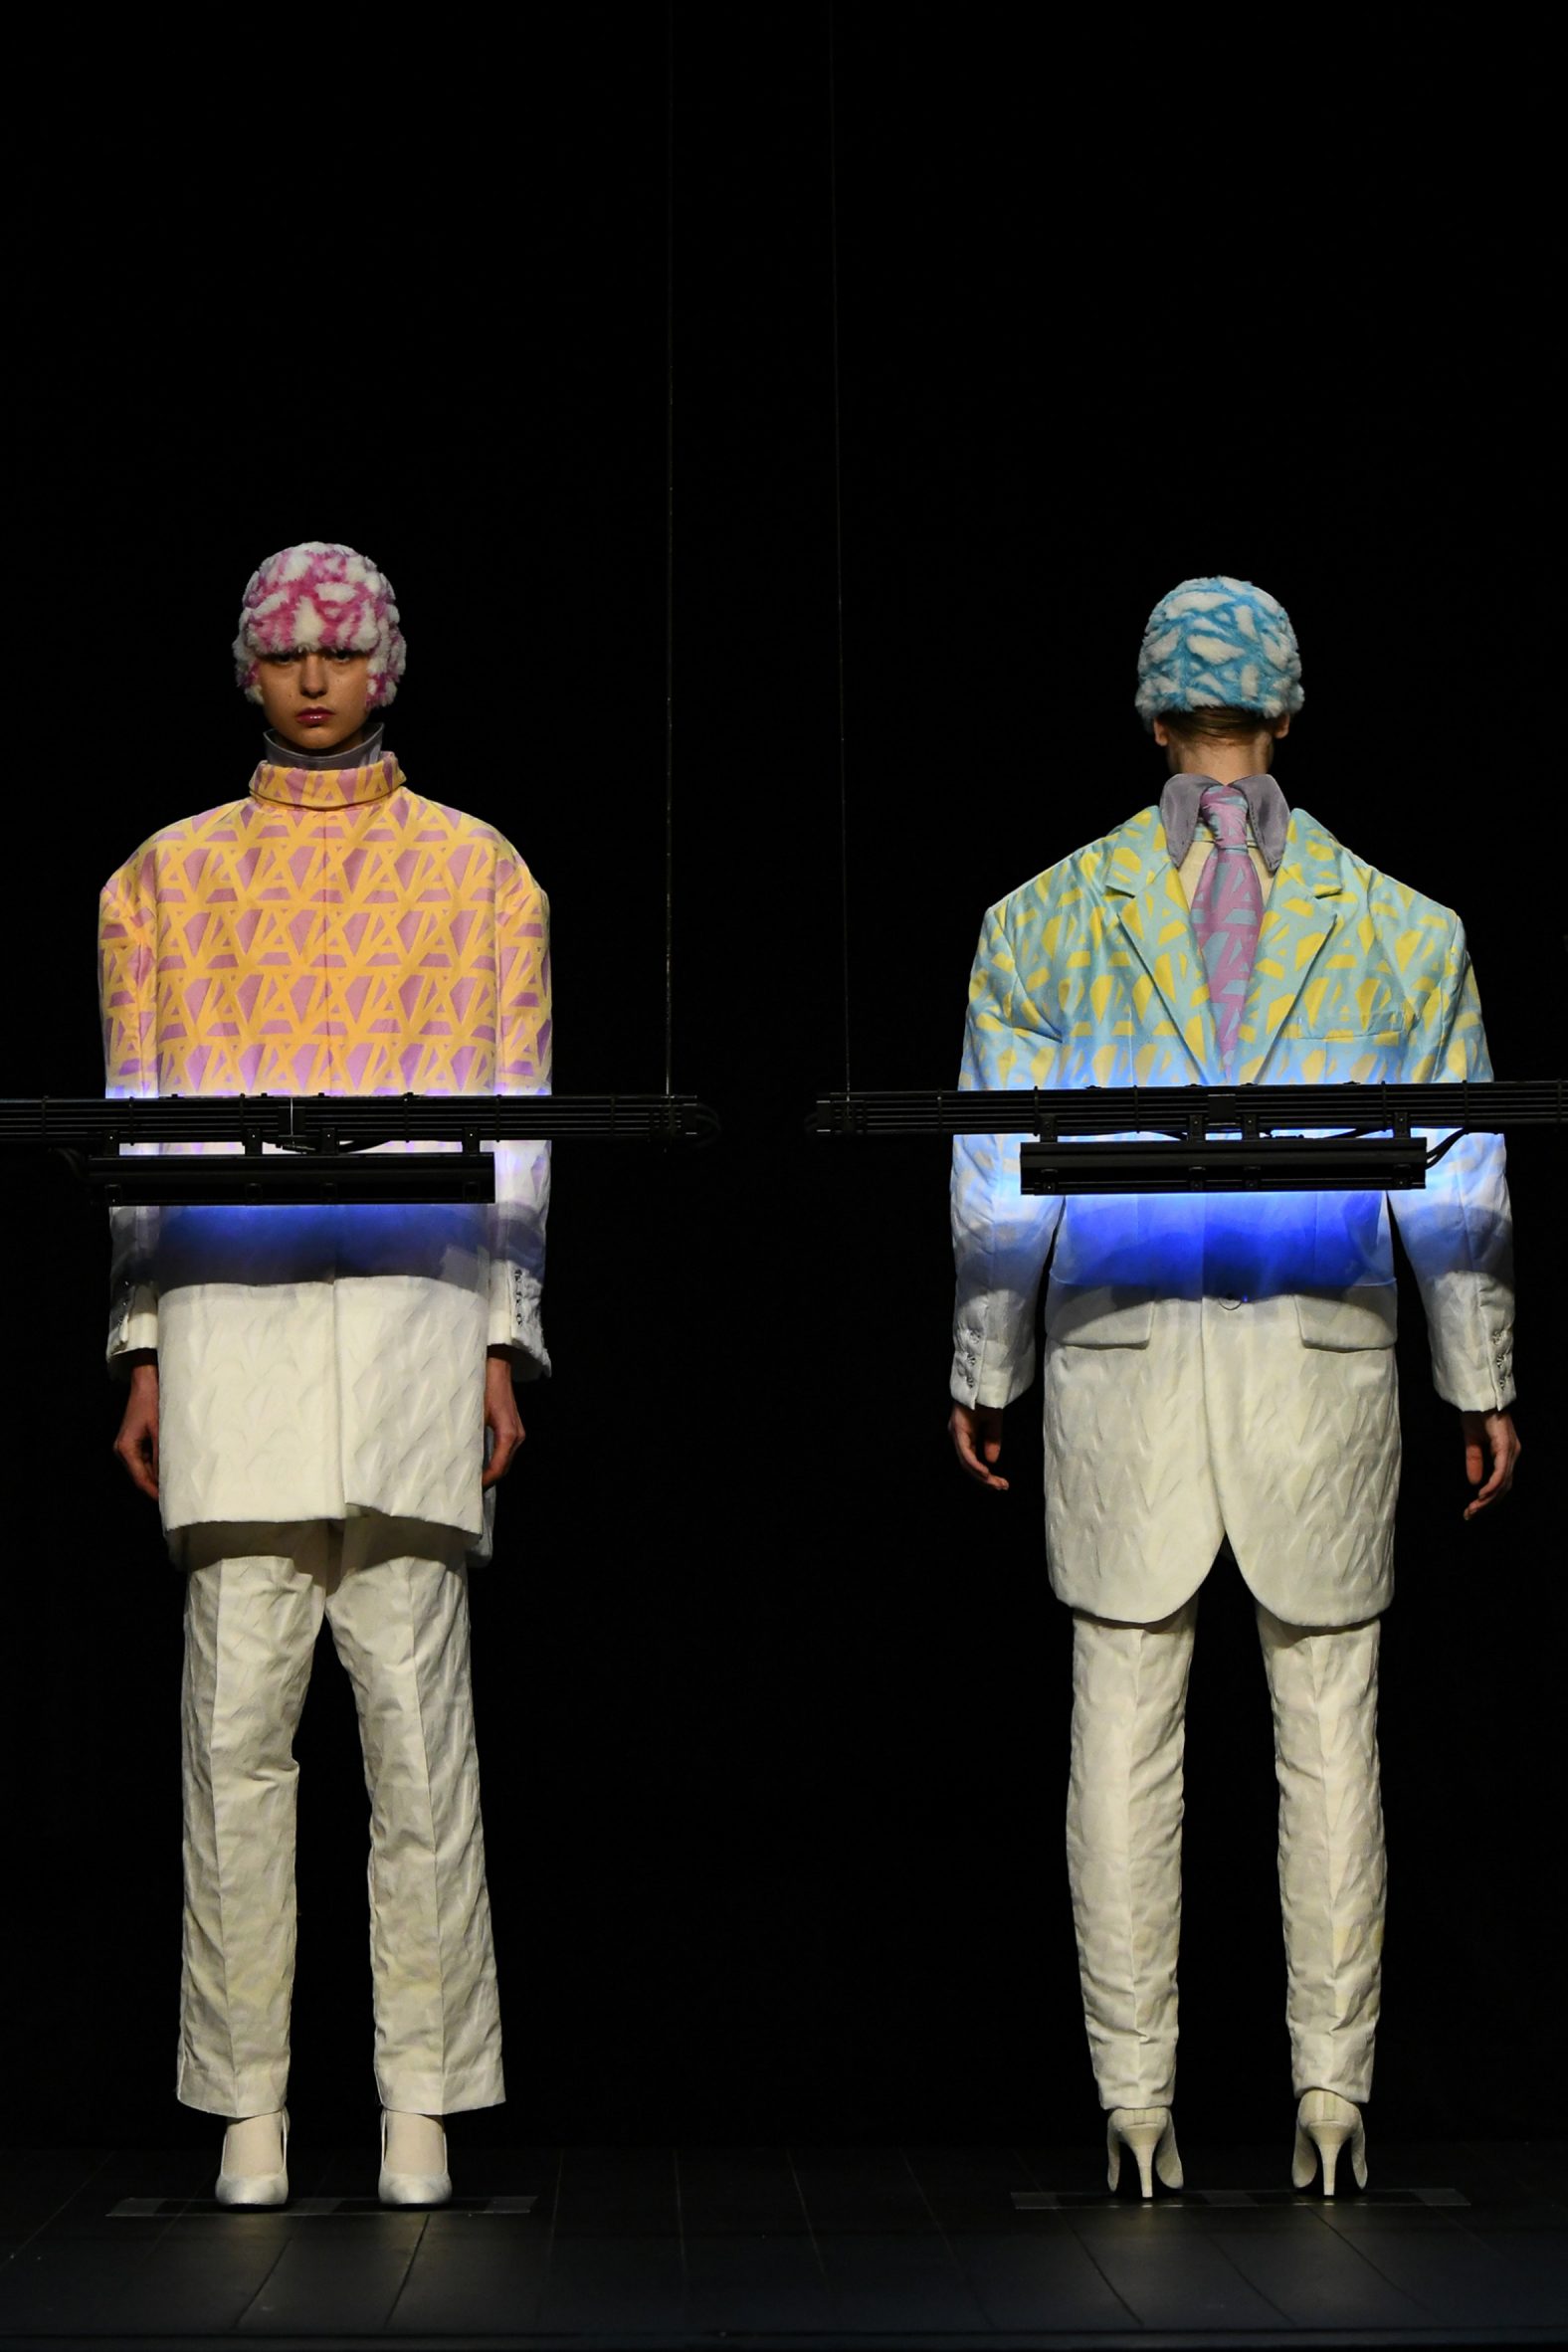 Chameleon Jacket Changes Color Based On What You Touch